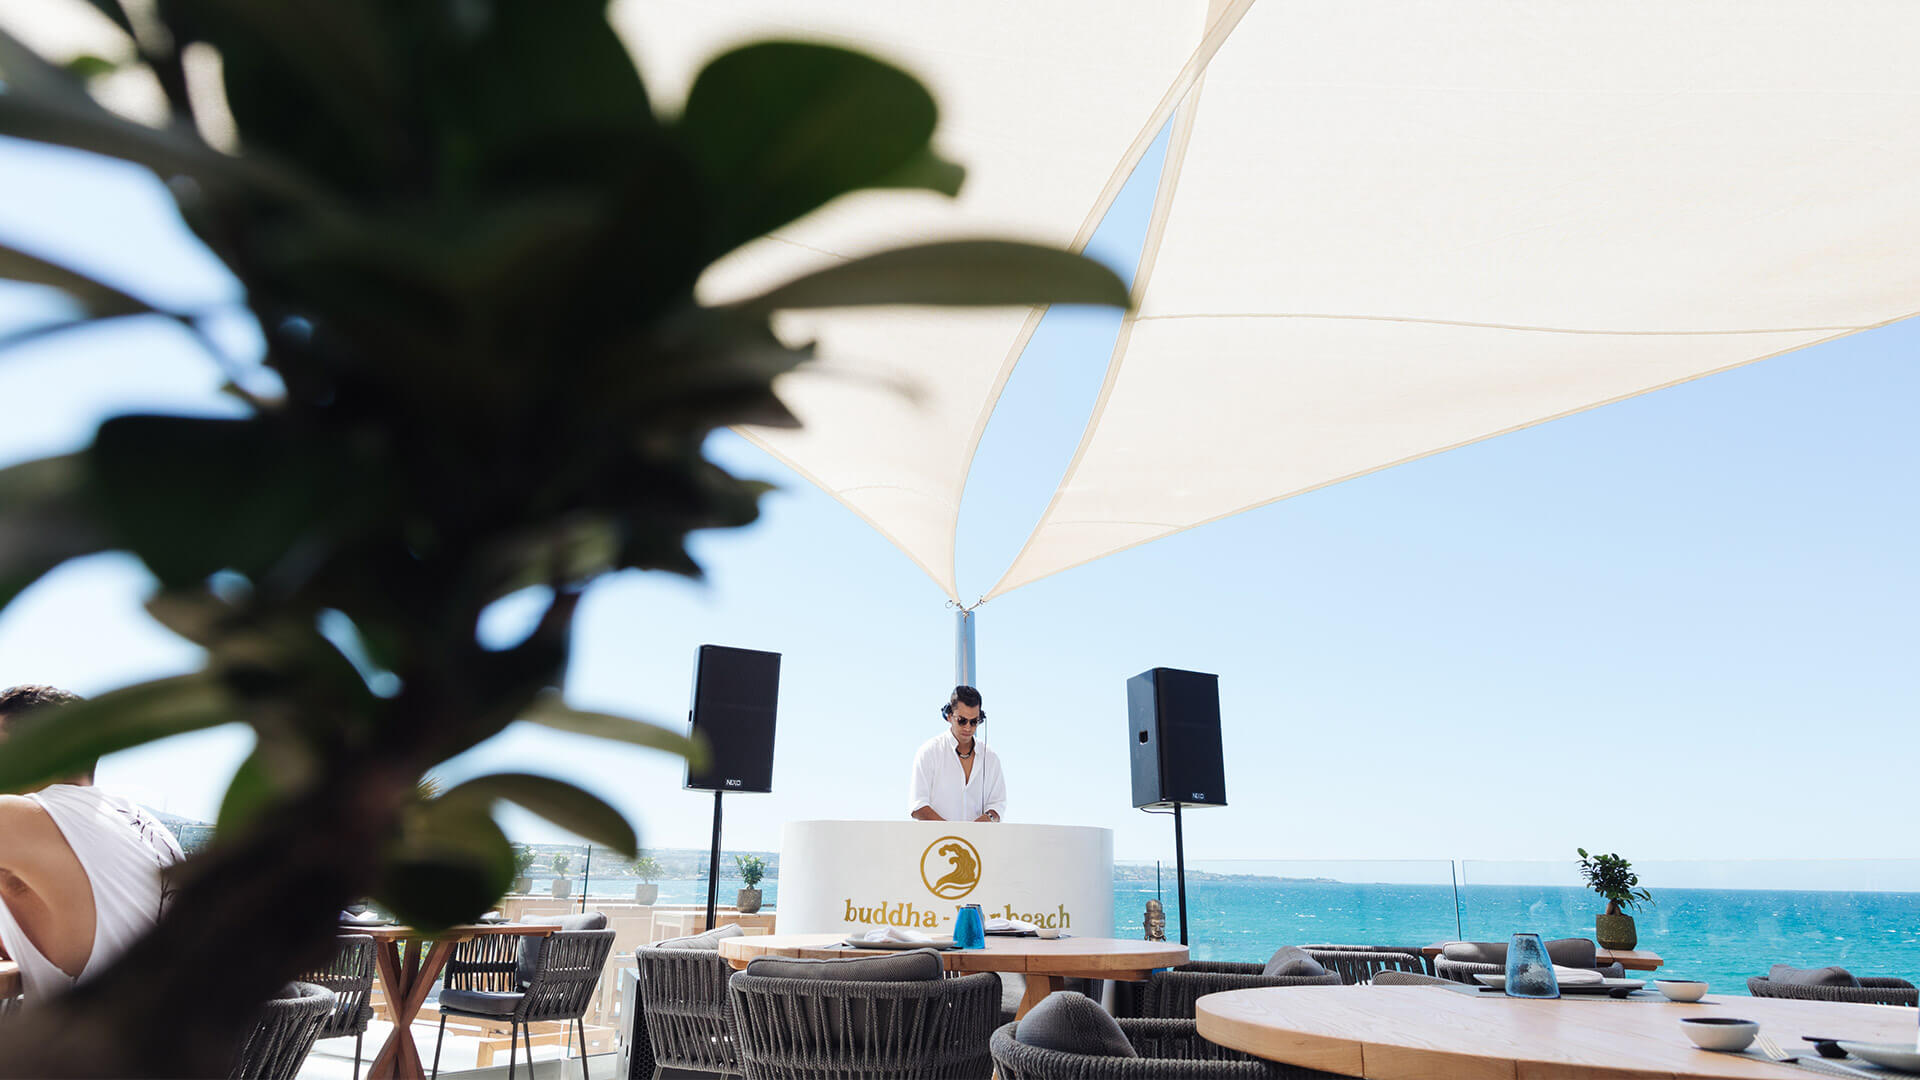 Live events with international DJs are hosted in Buddha-bar Beach Crete